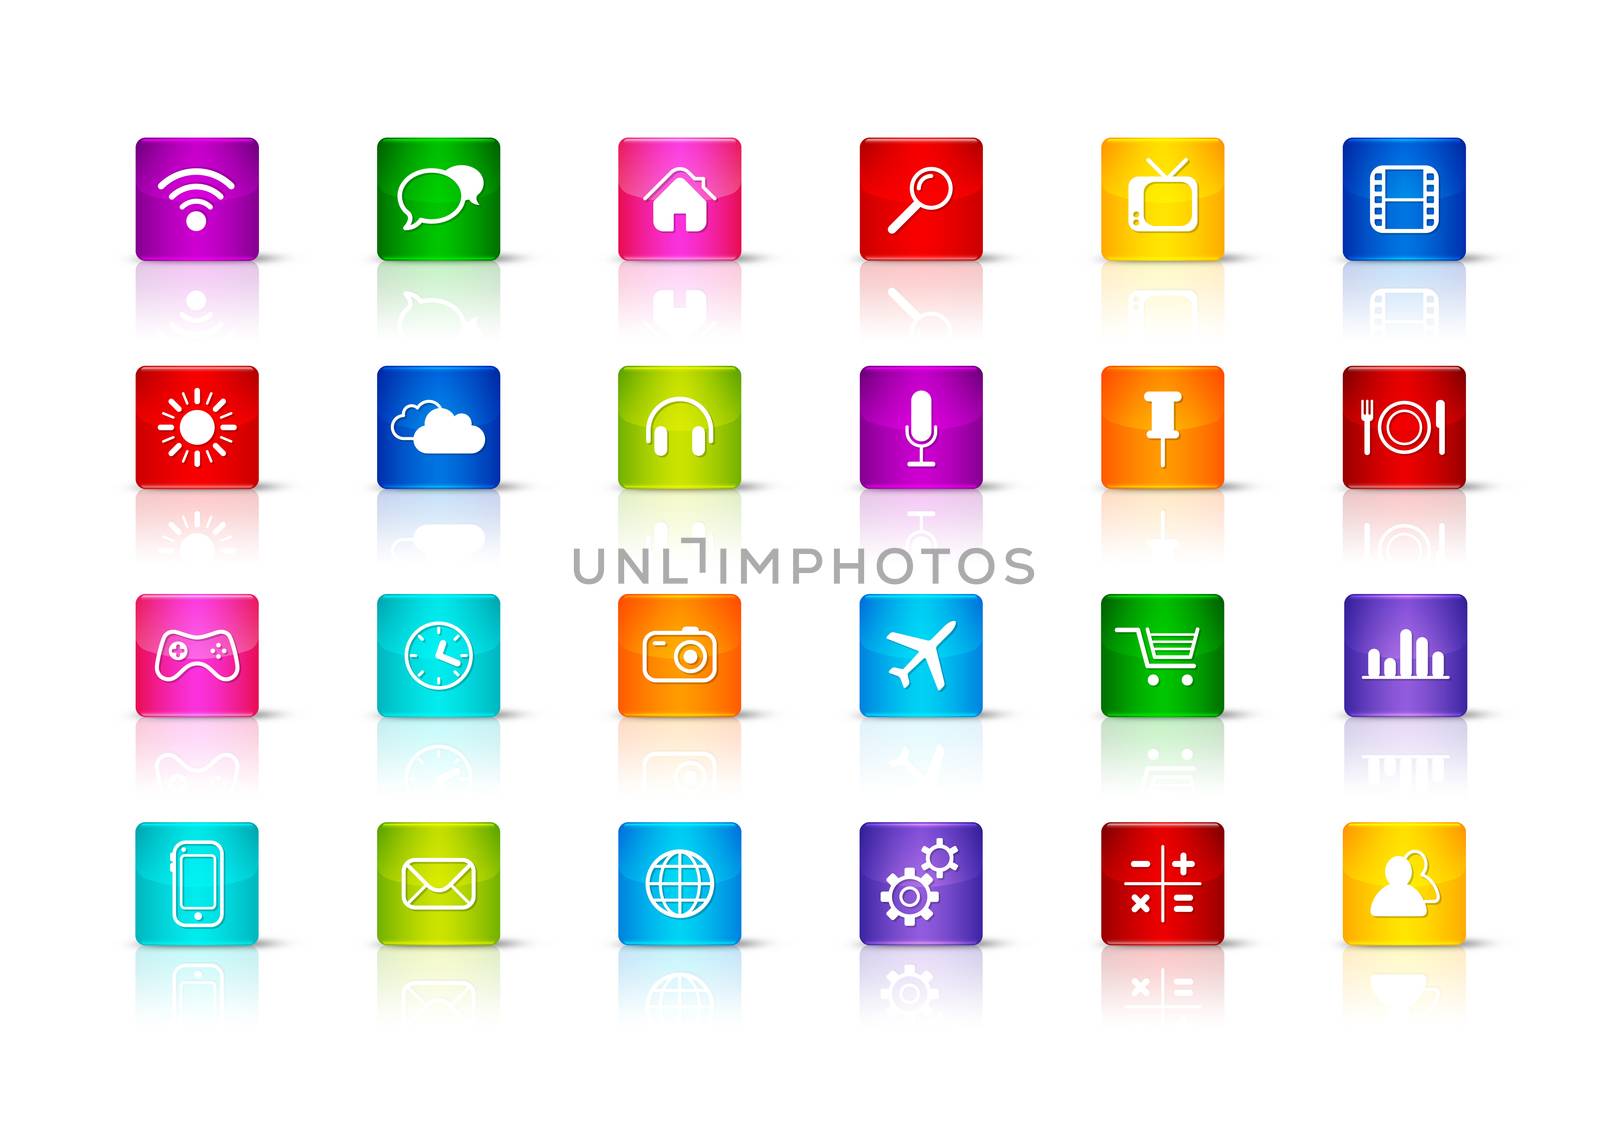 Desktop Icons collection. Isolated on a white background